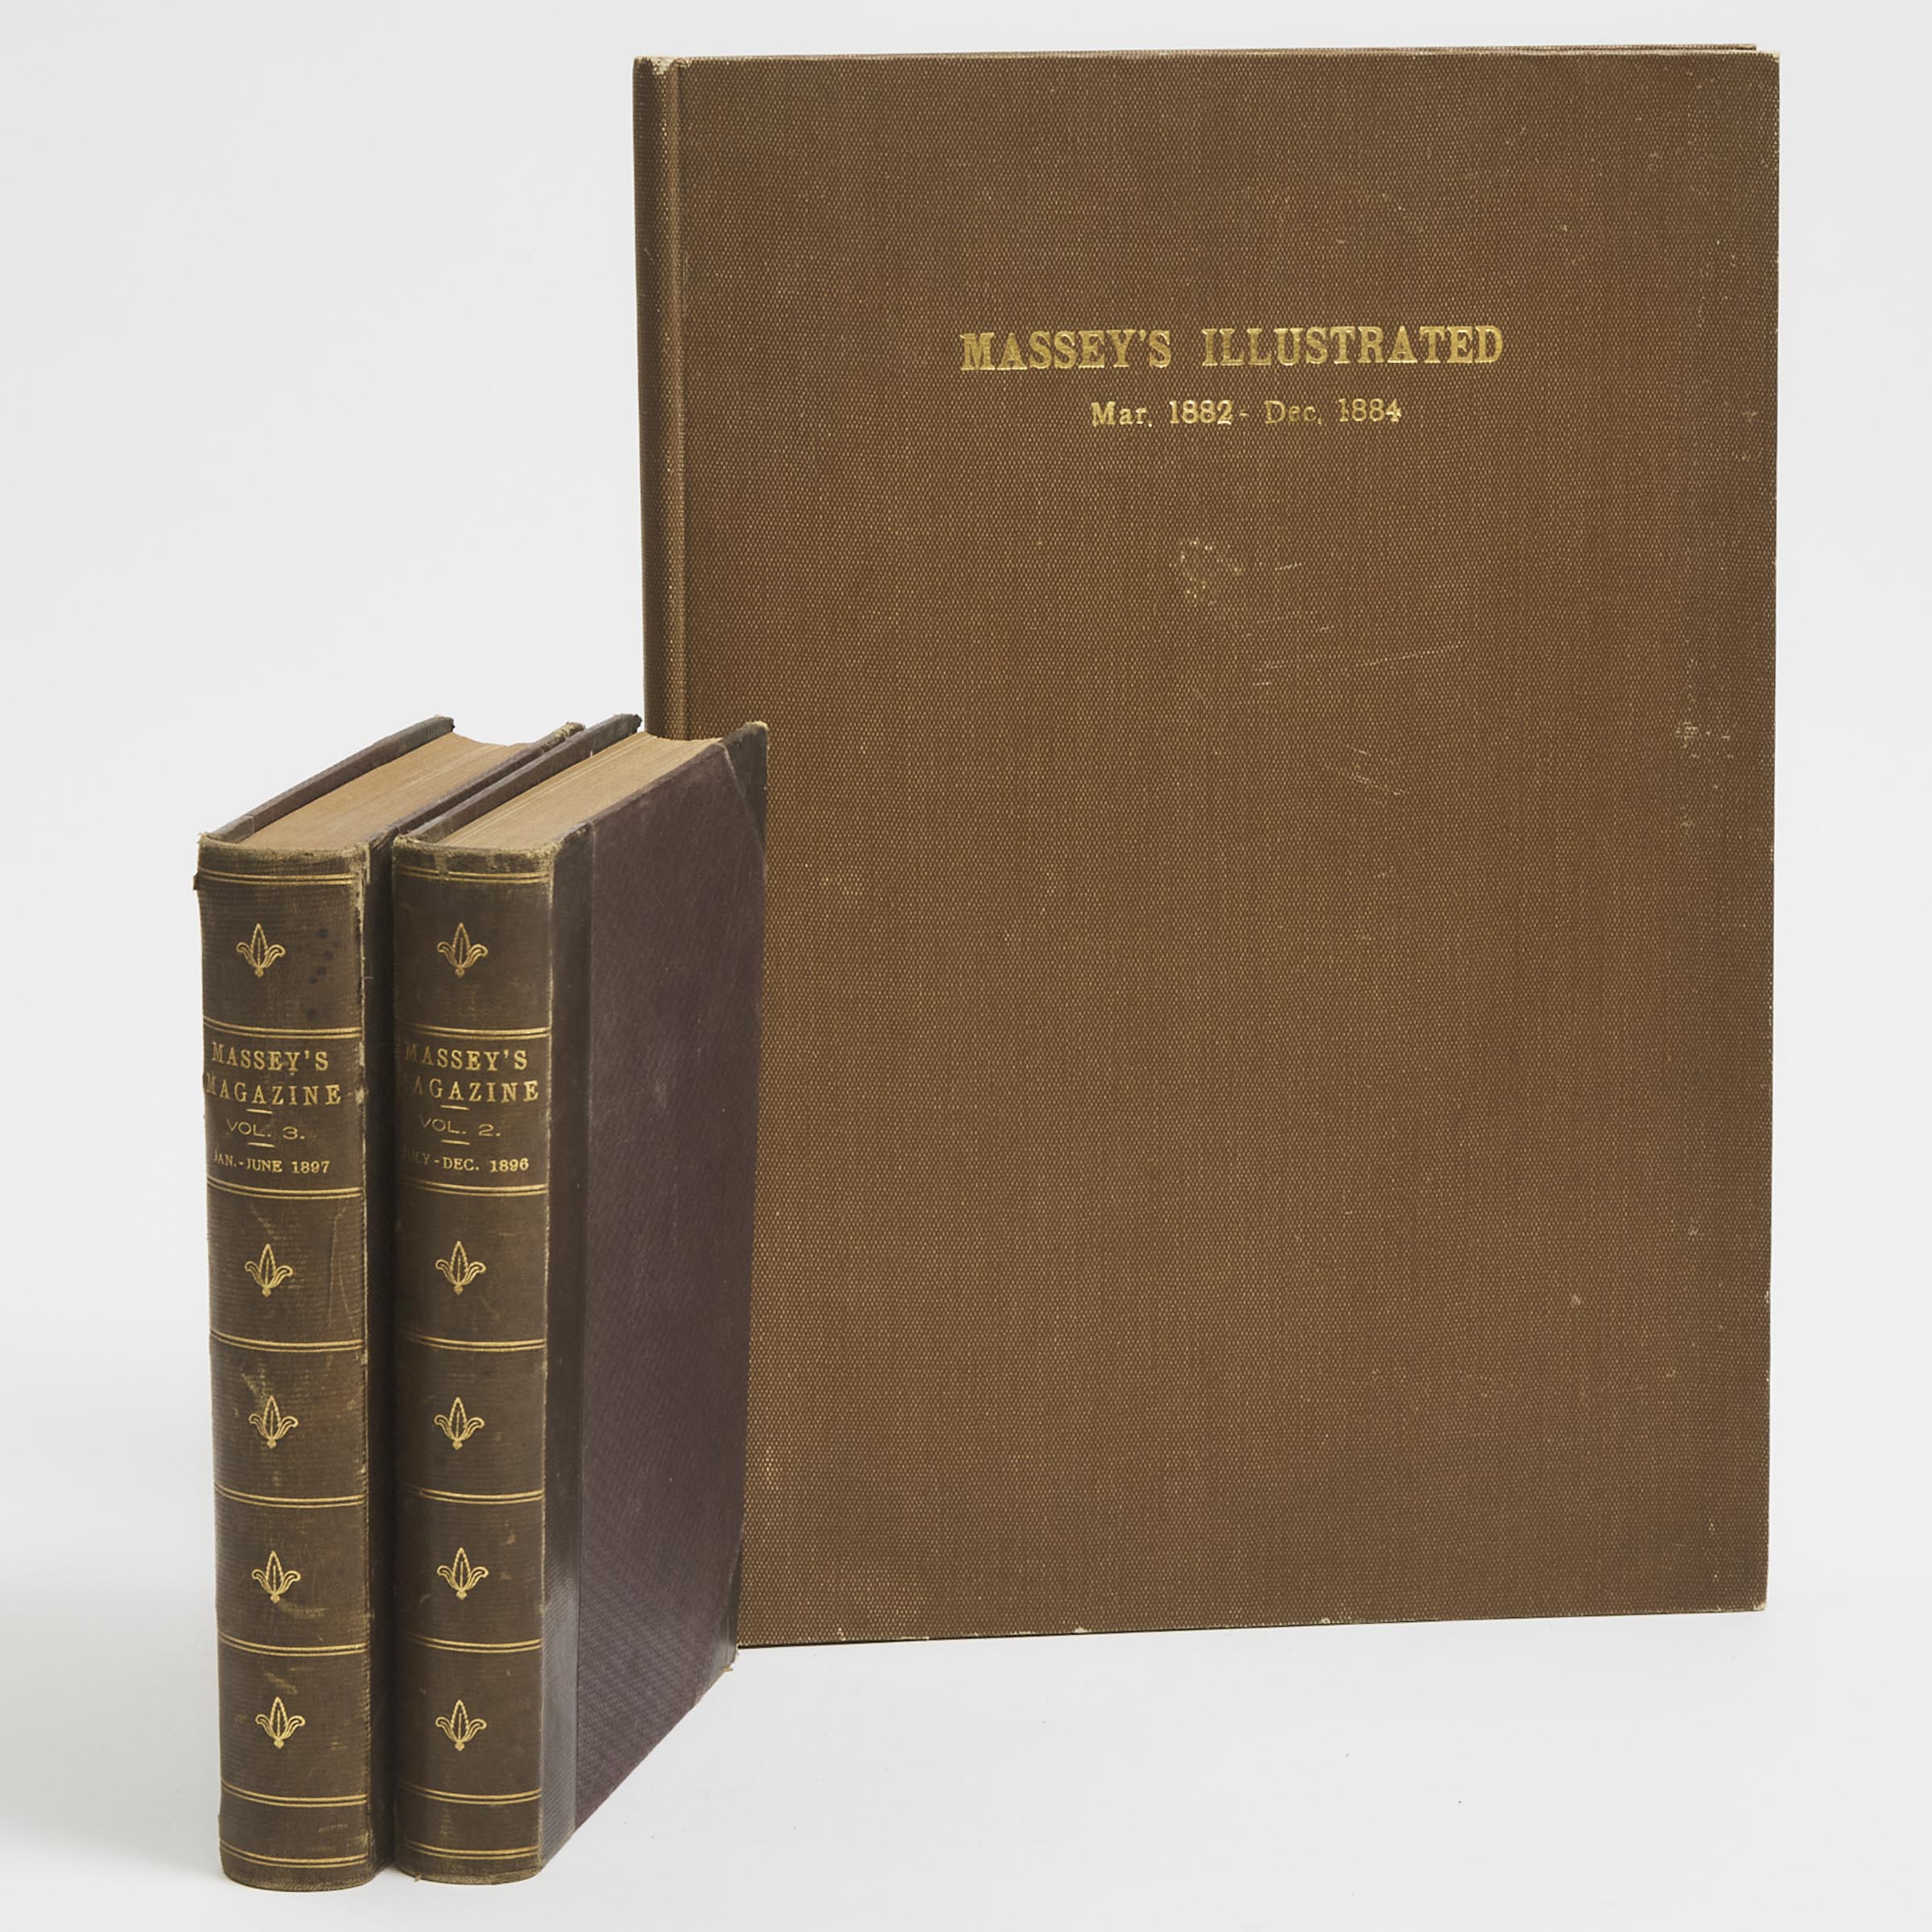 Three Volumes from the Library of Chester D. Massey